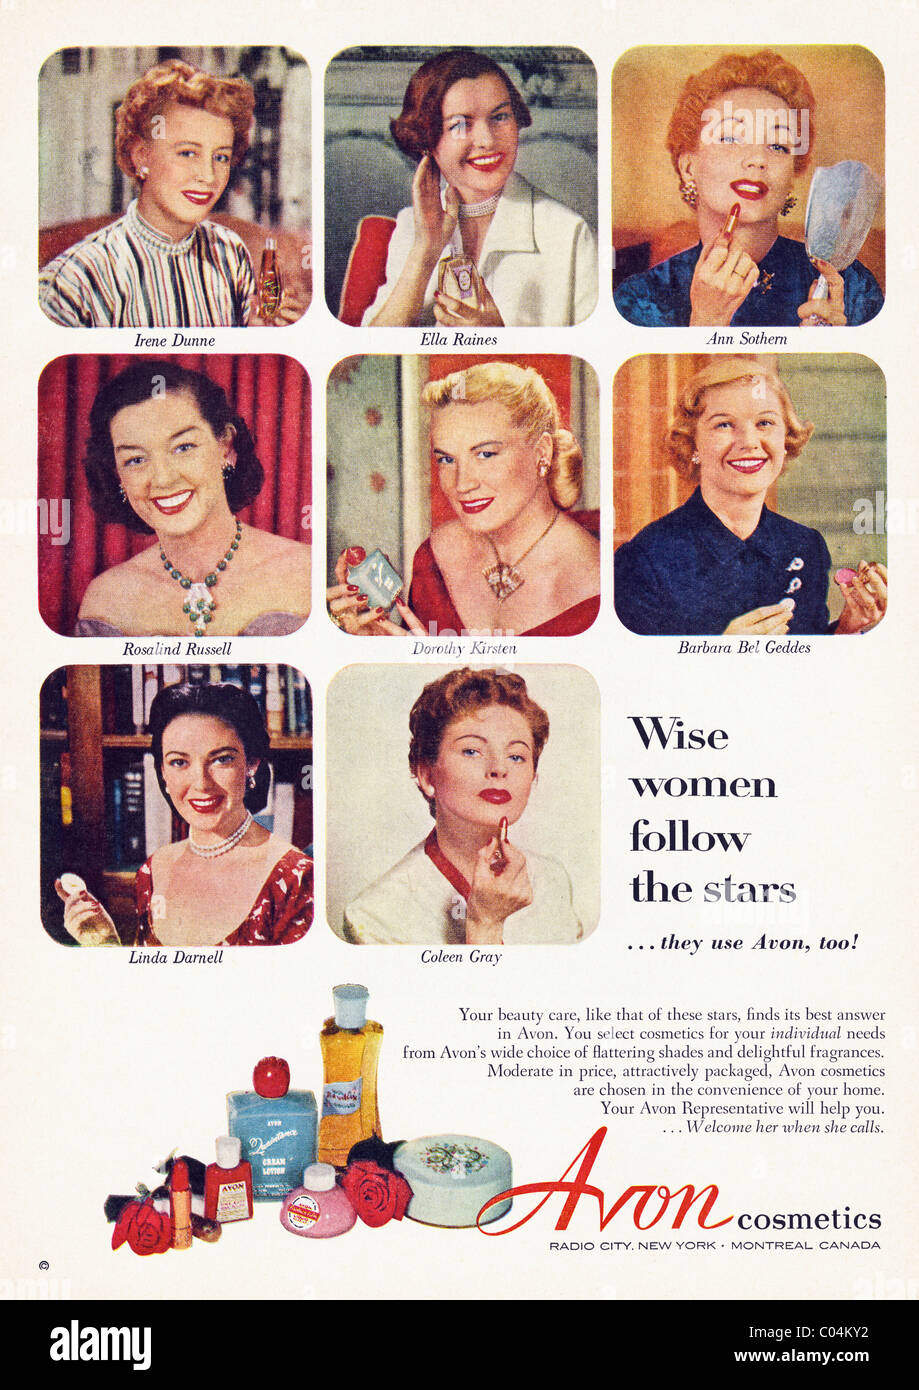 Original 1950s full page advertisement in American consumer magazine for AVON COSMETICS featuring film stars of the period Stock Photo